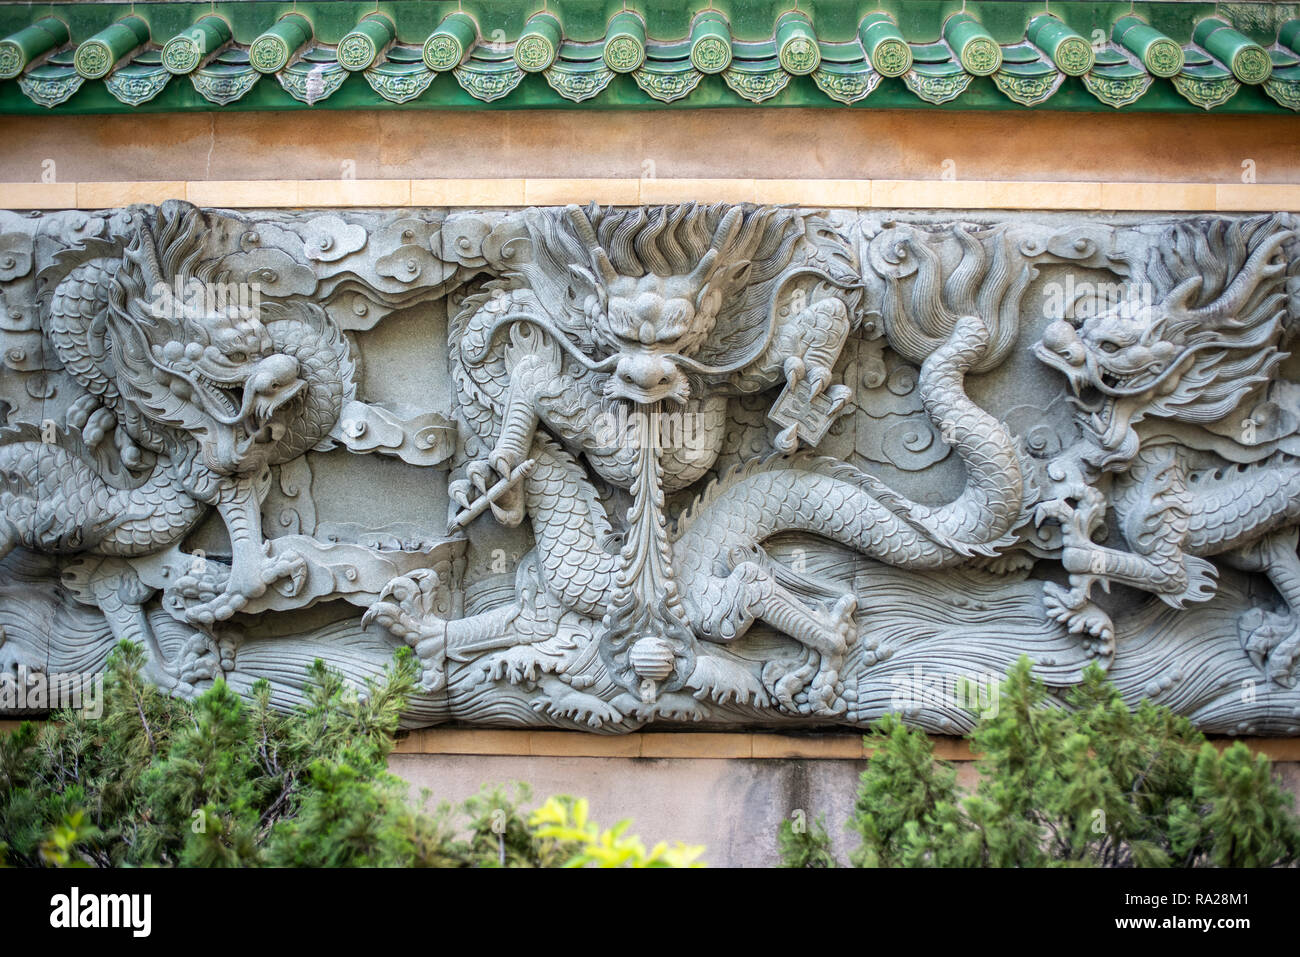 Three of the nine dragons adorning the rear wall of Yau Ma Tei Tin Hau Temple overlooking the Public Square Street Rest Garden in Hong Kong. Stock Photo